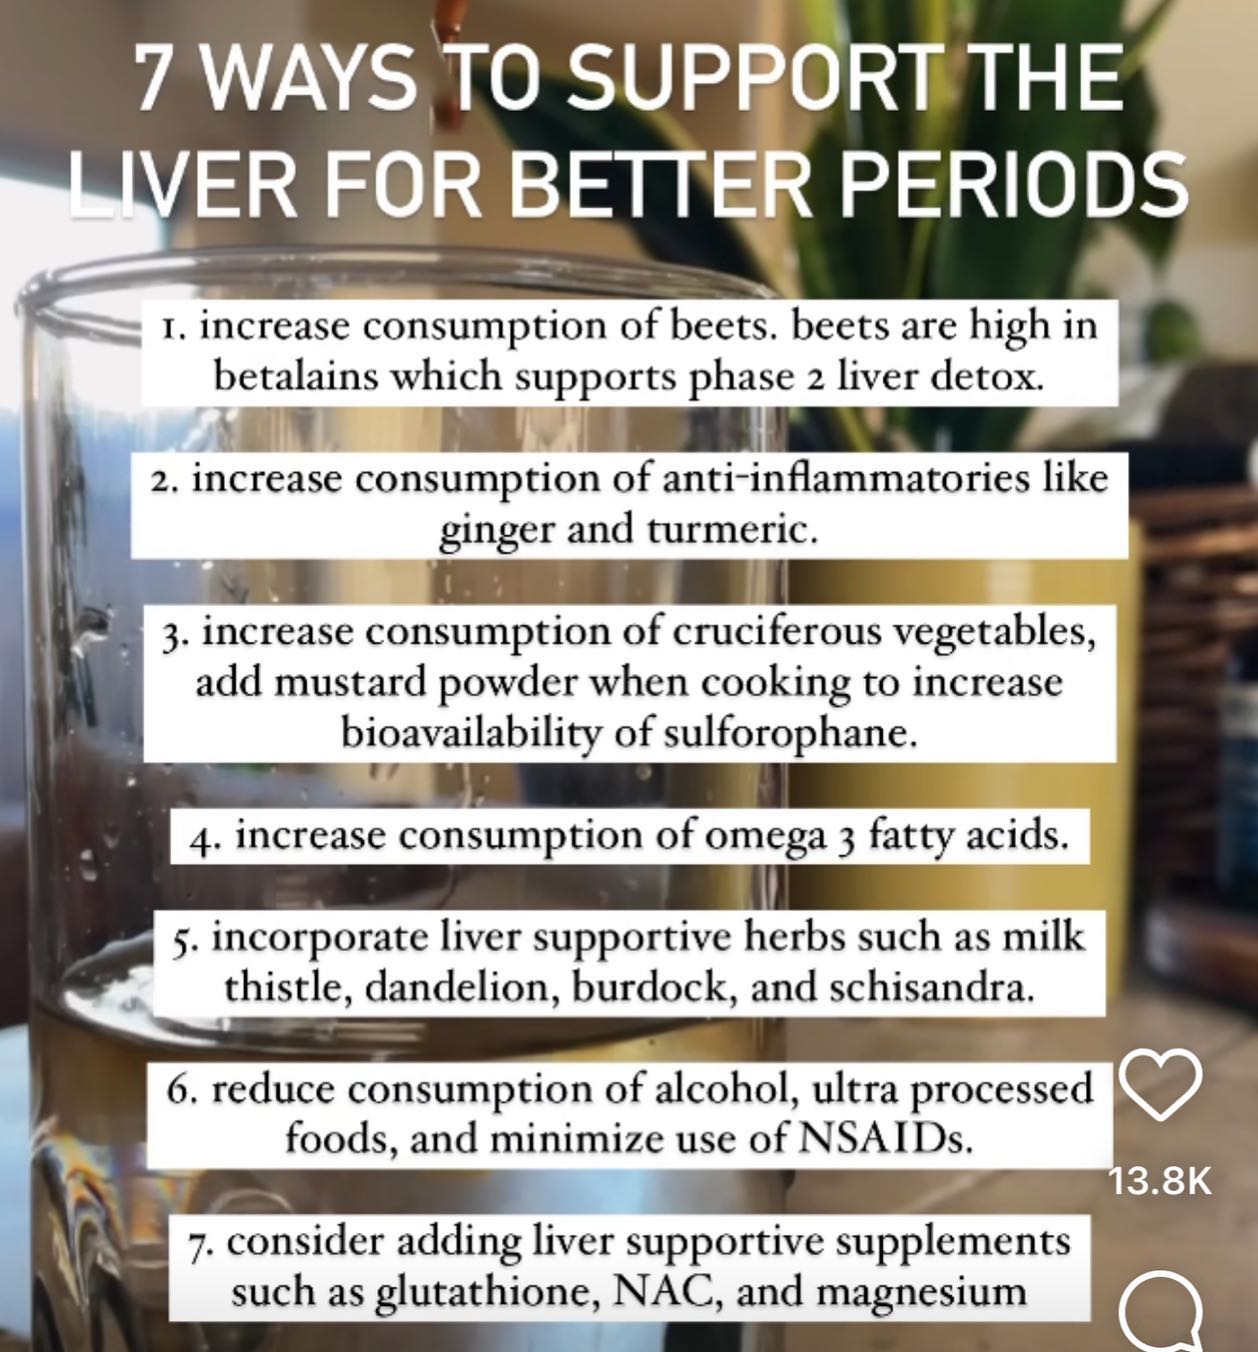 Seven ways to support your liver to have better periods.